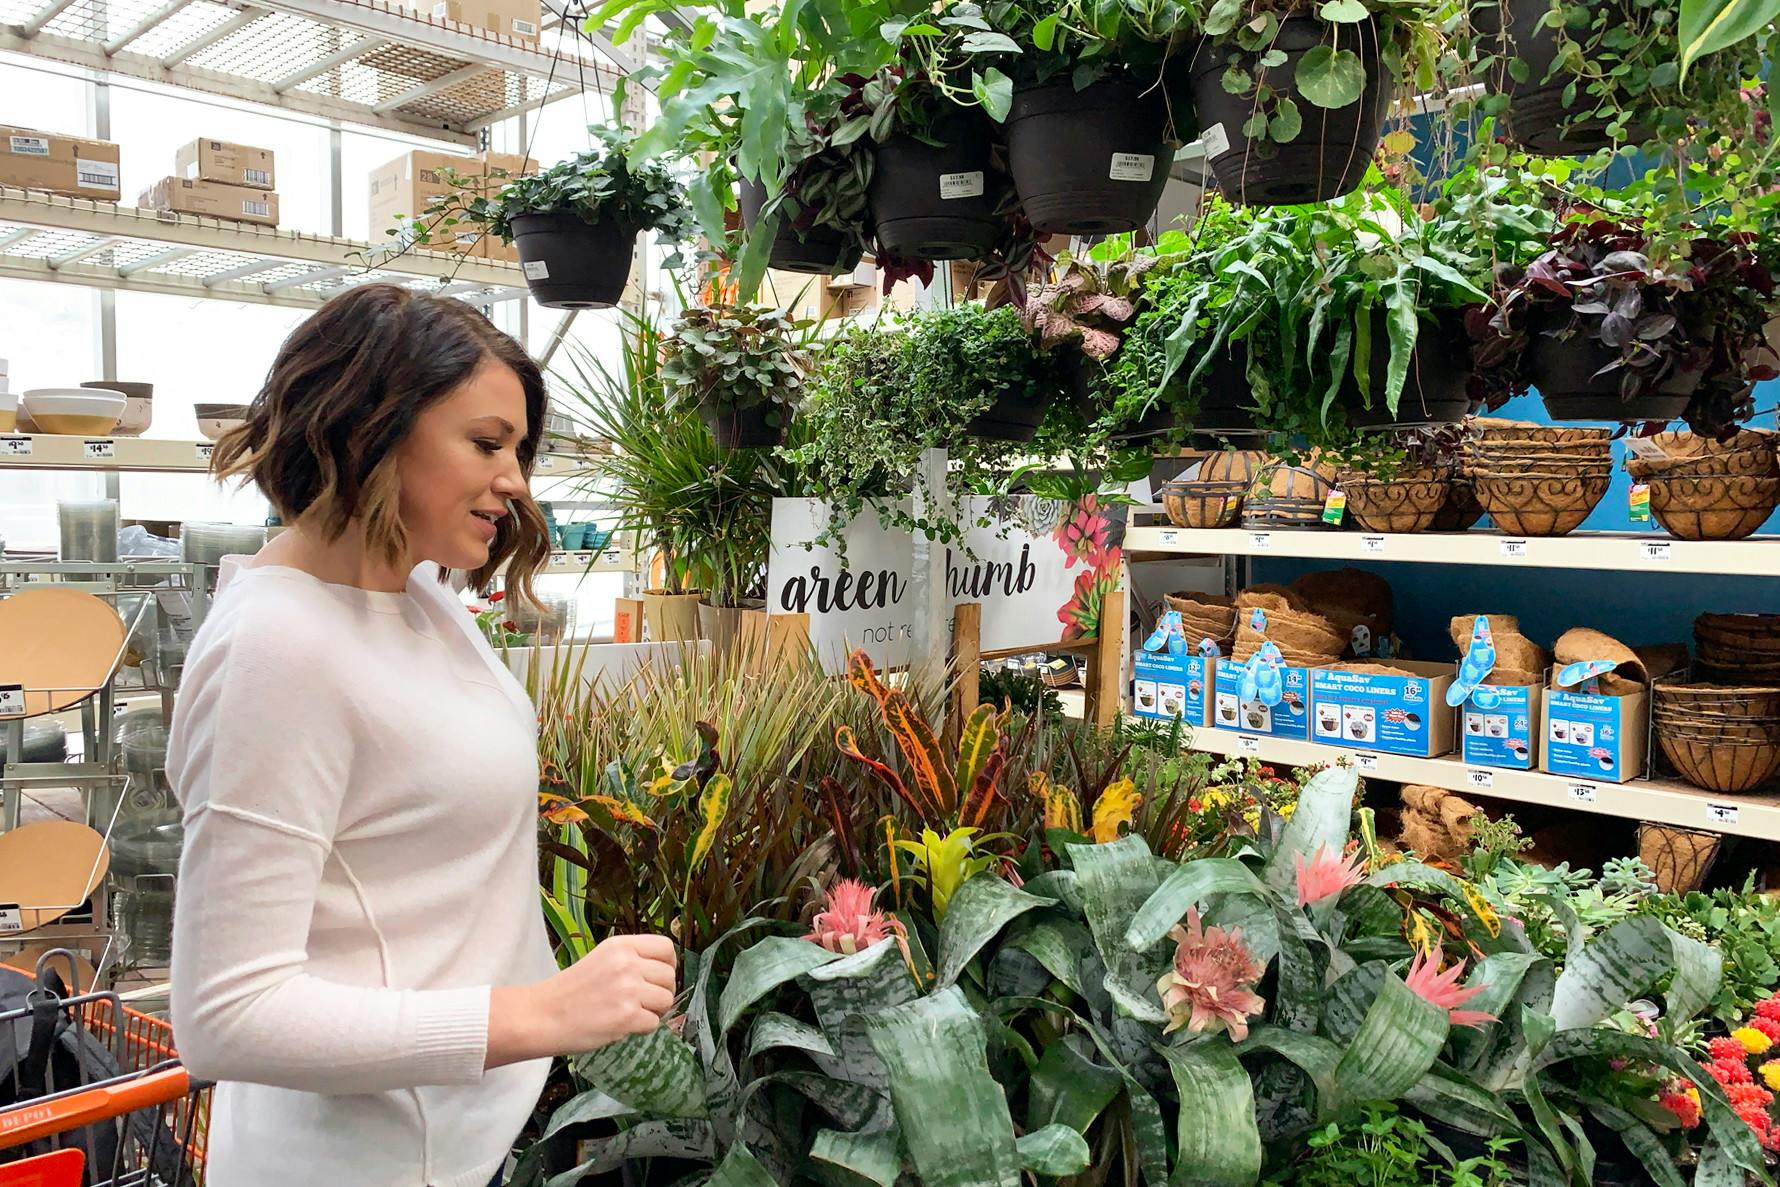 A woman looking at plants in the Home Depot garden center.